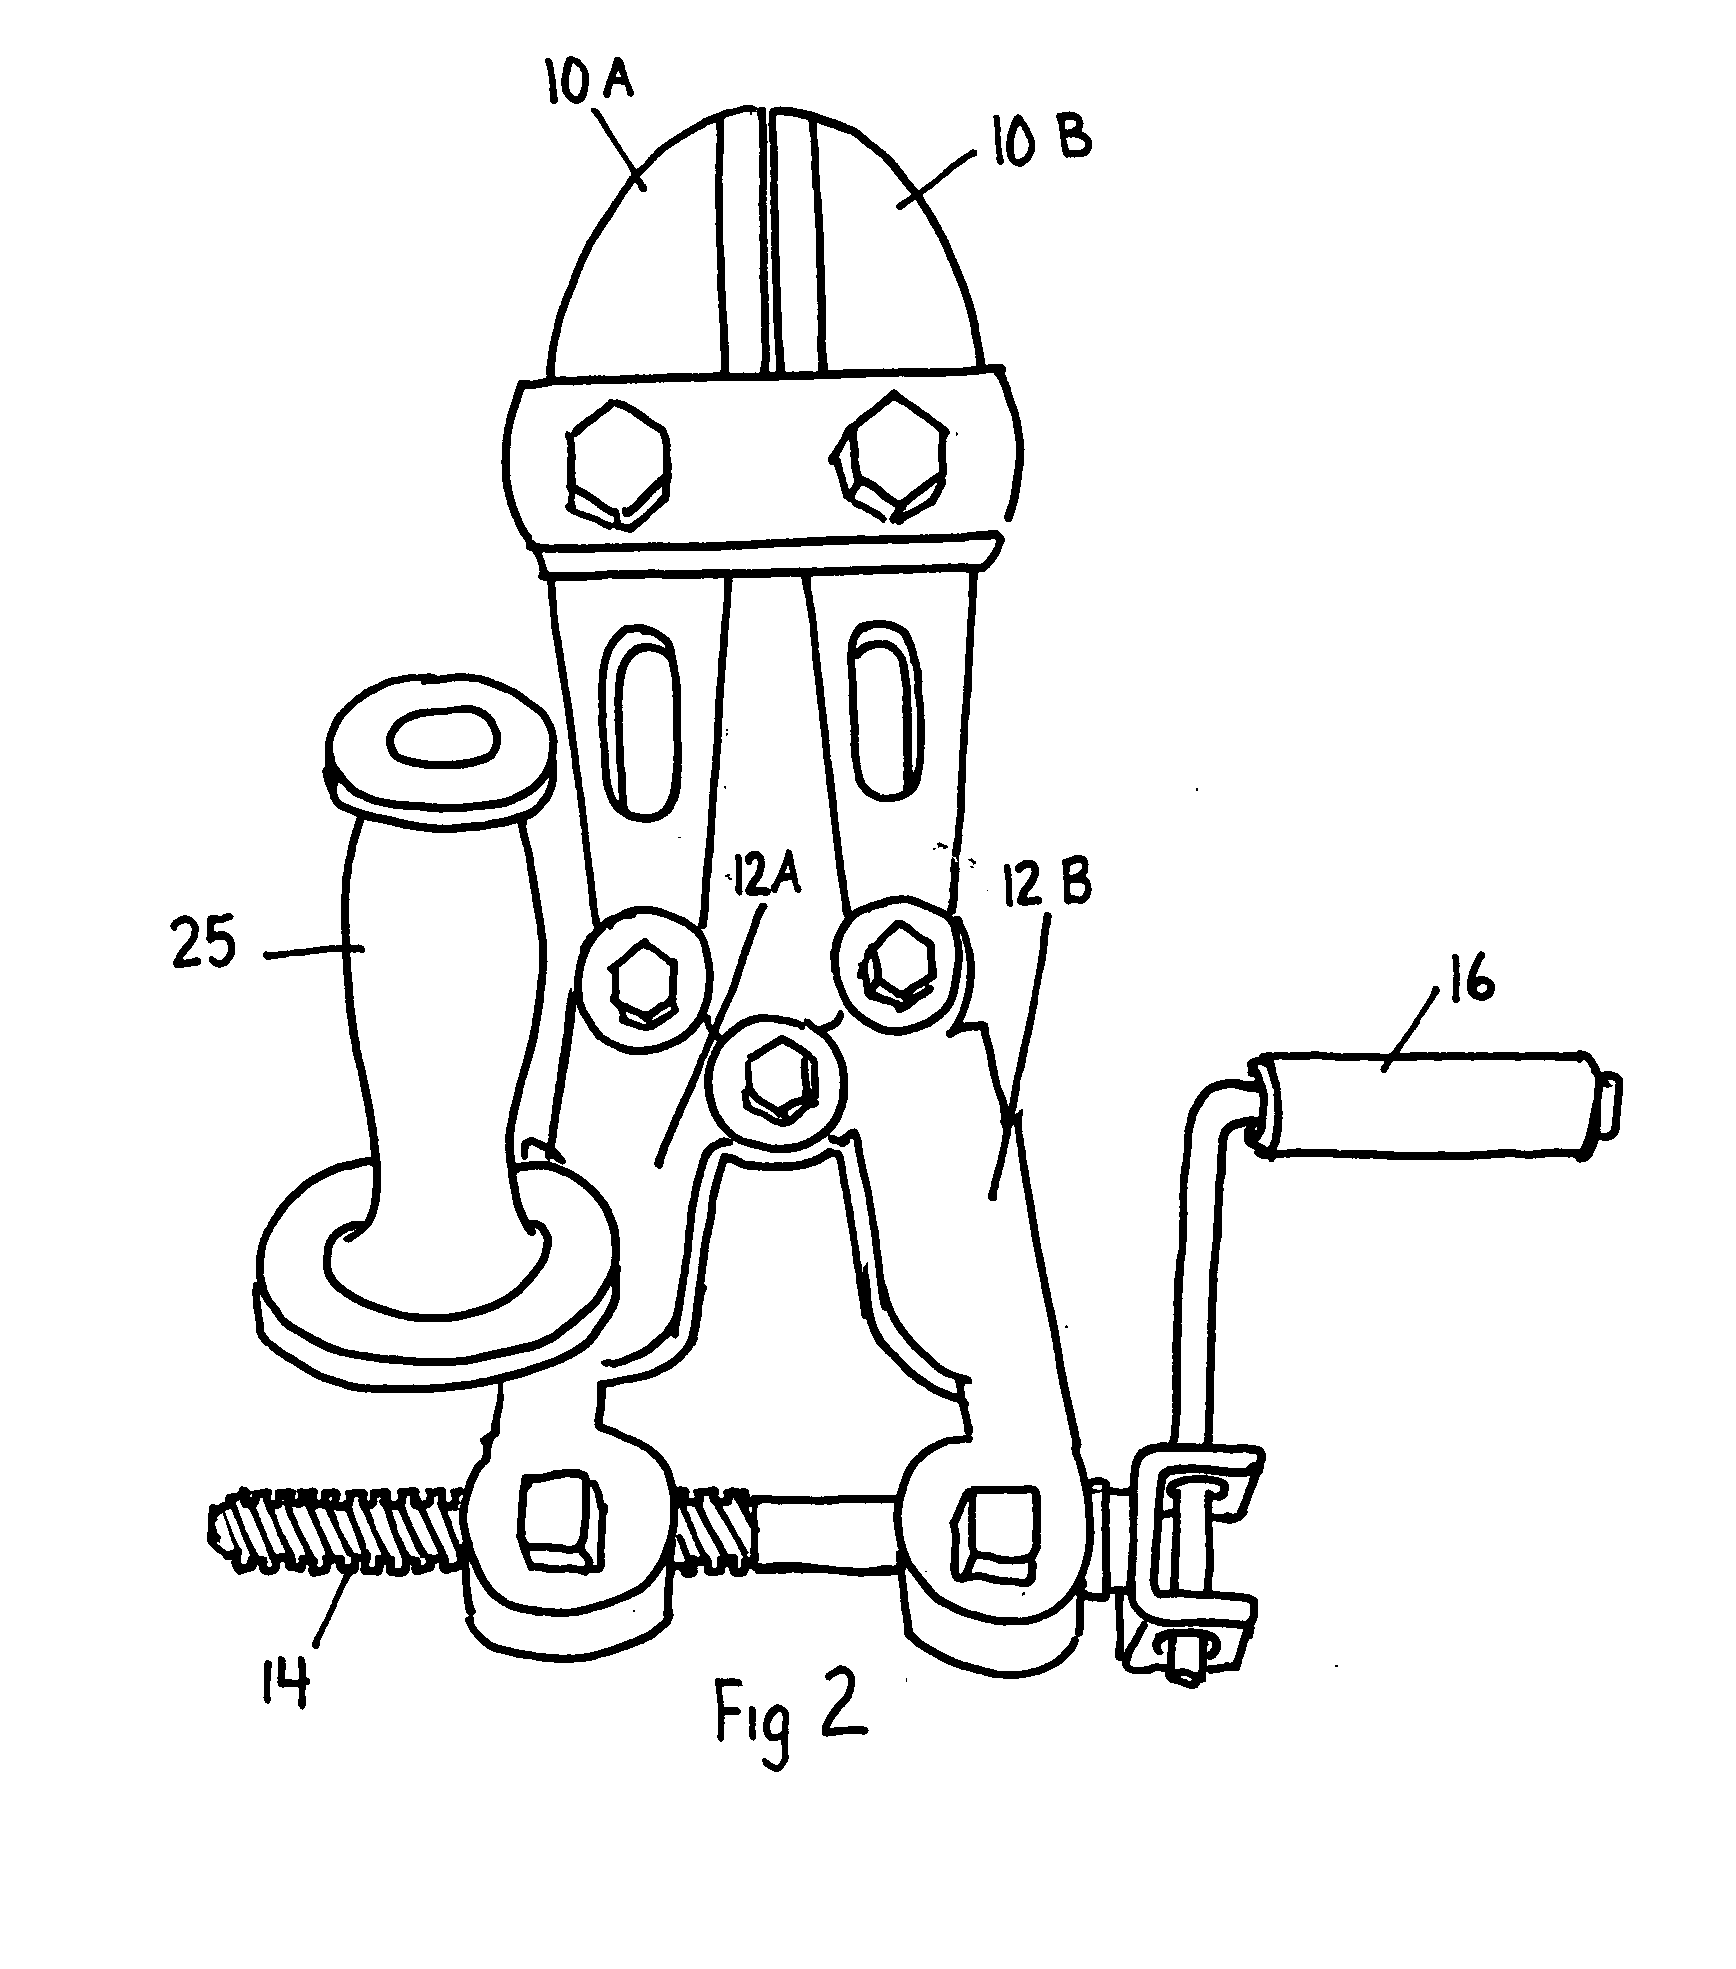 Compact bolt cutter with improved mechanical advantage